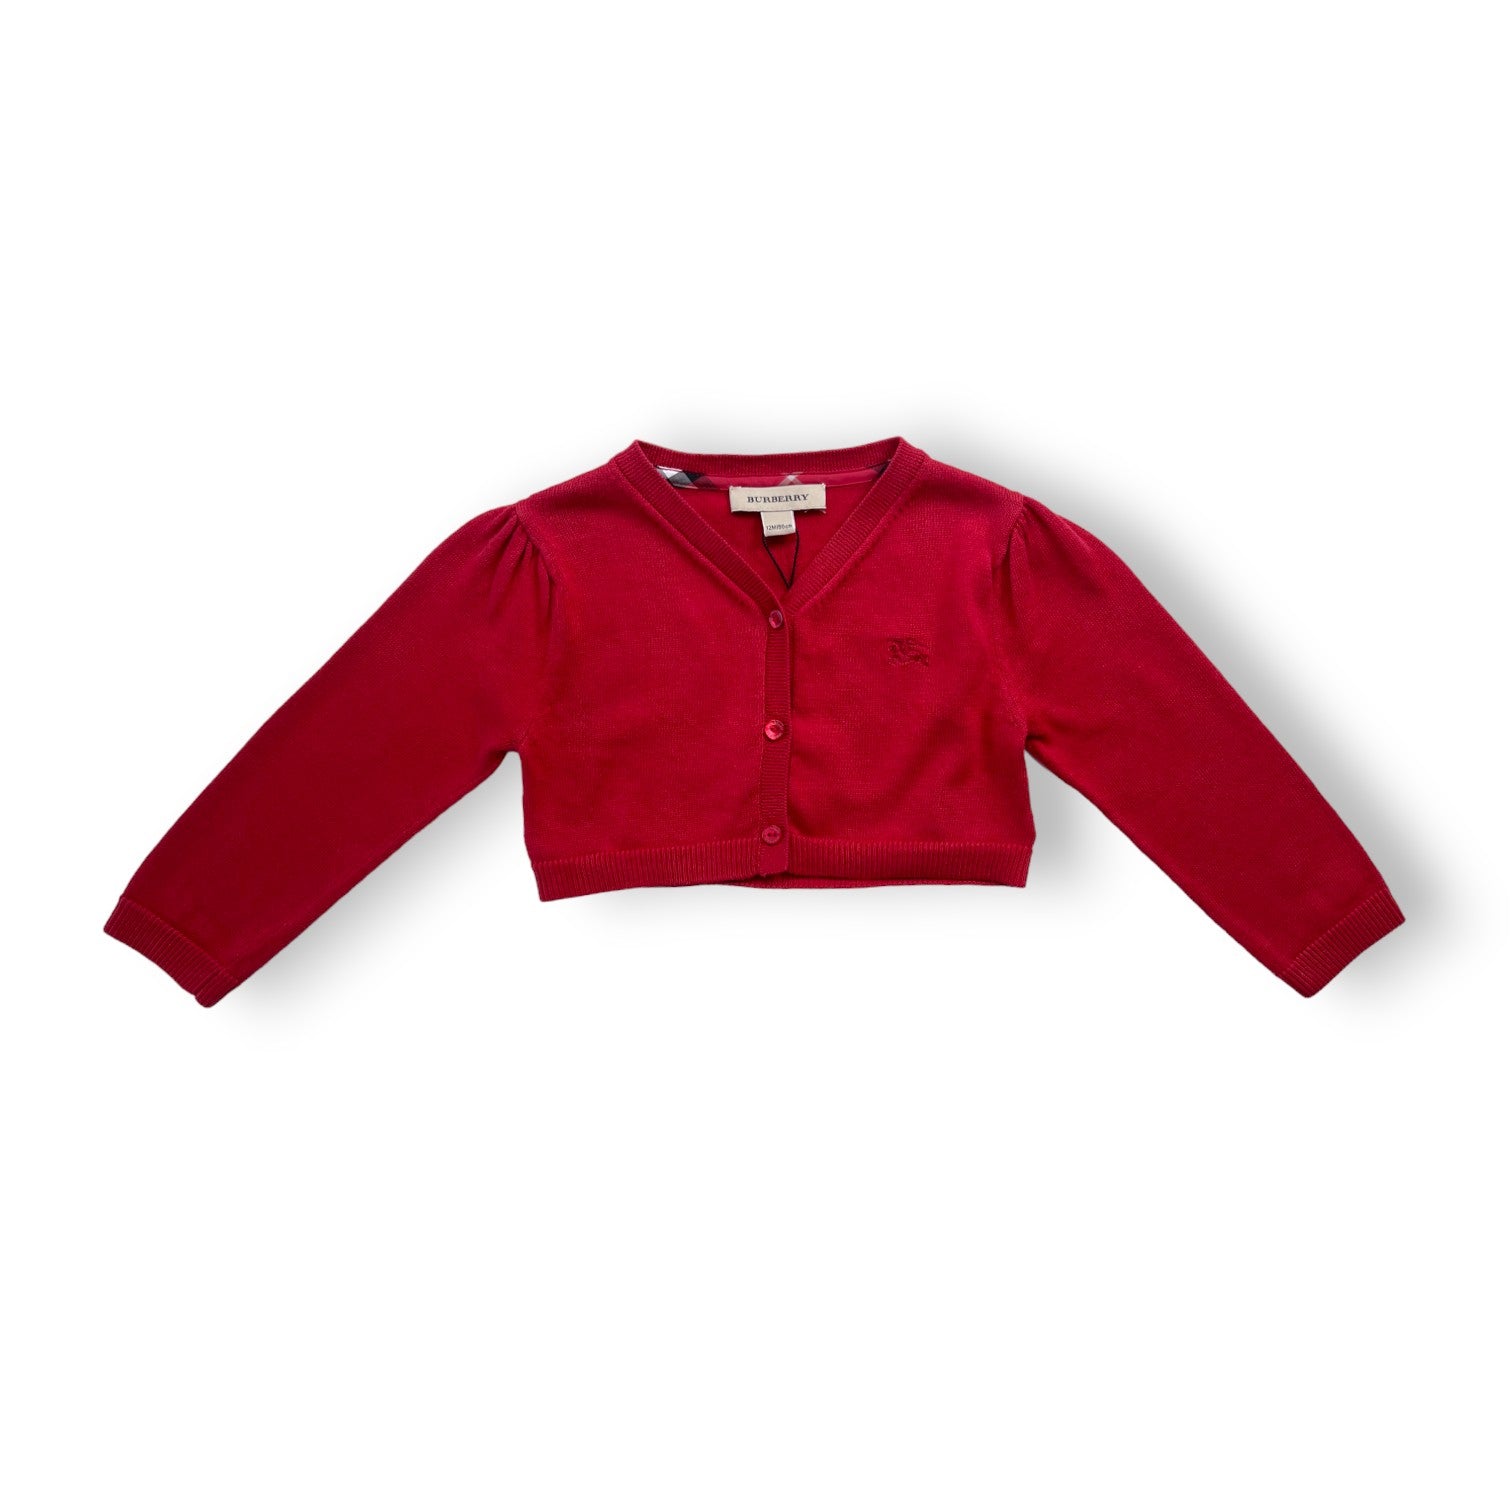 BURBERRY - Cardigan court rouge (neuf) - 12 mois